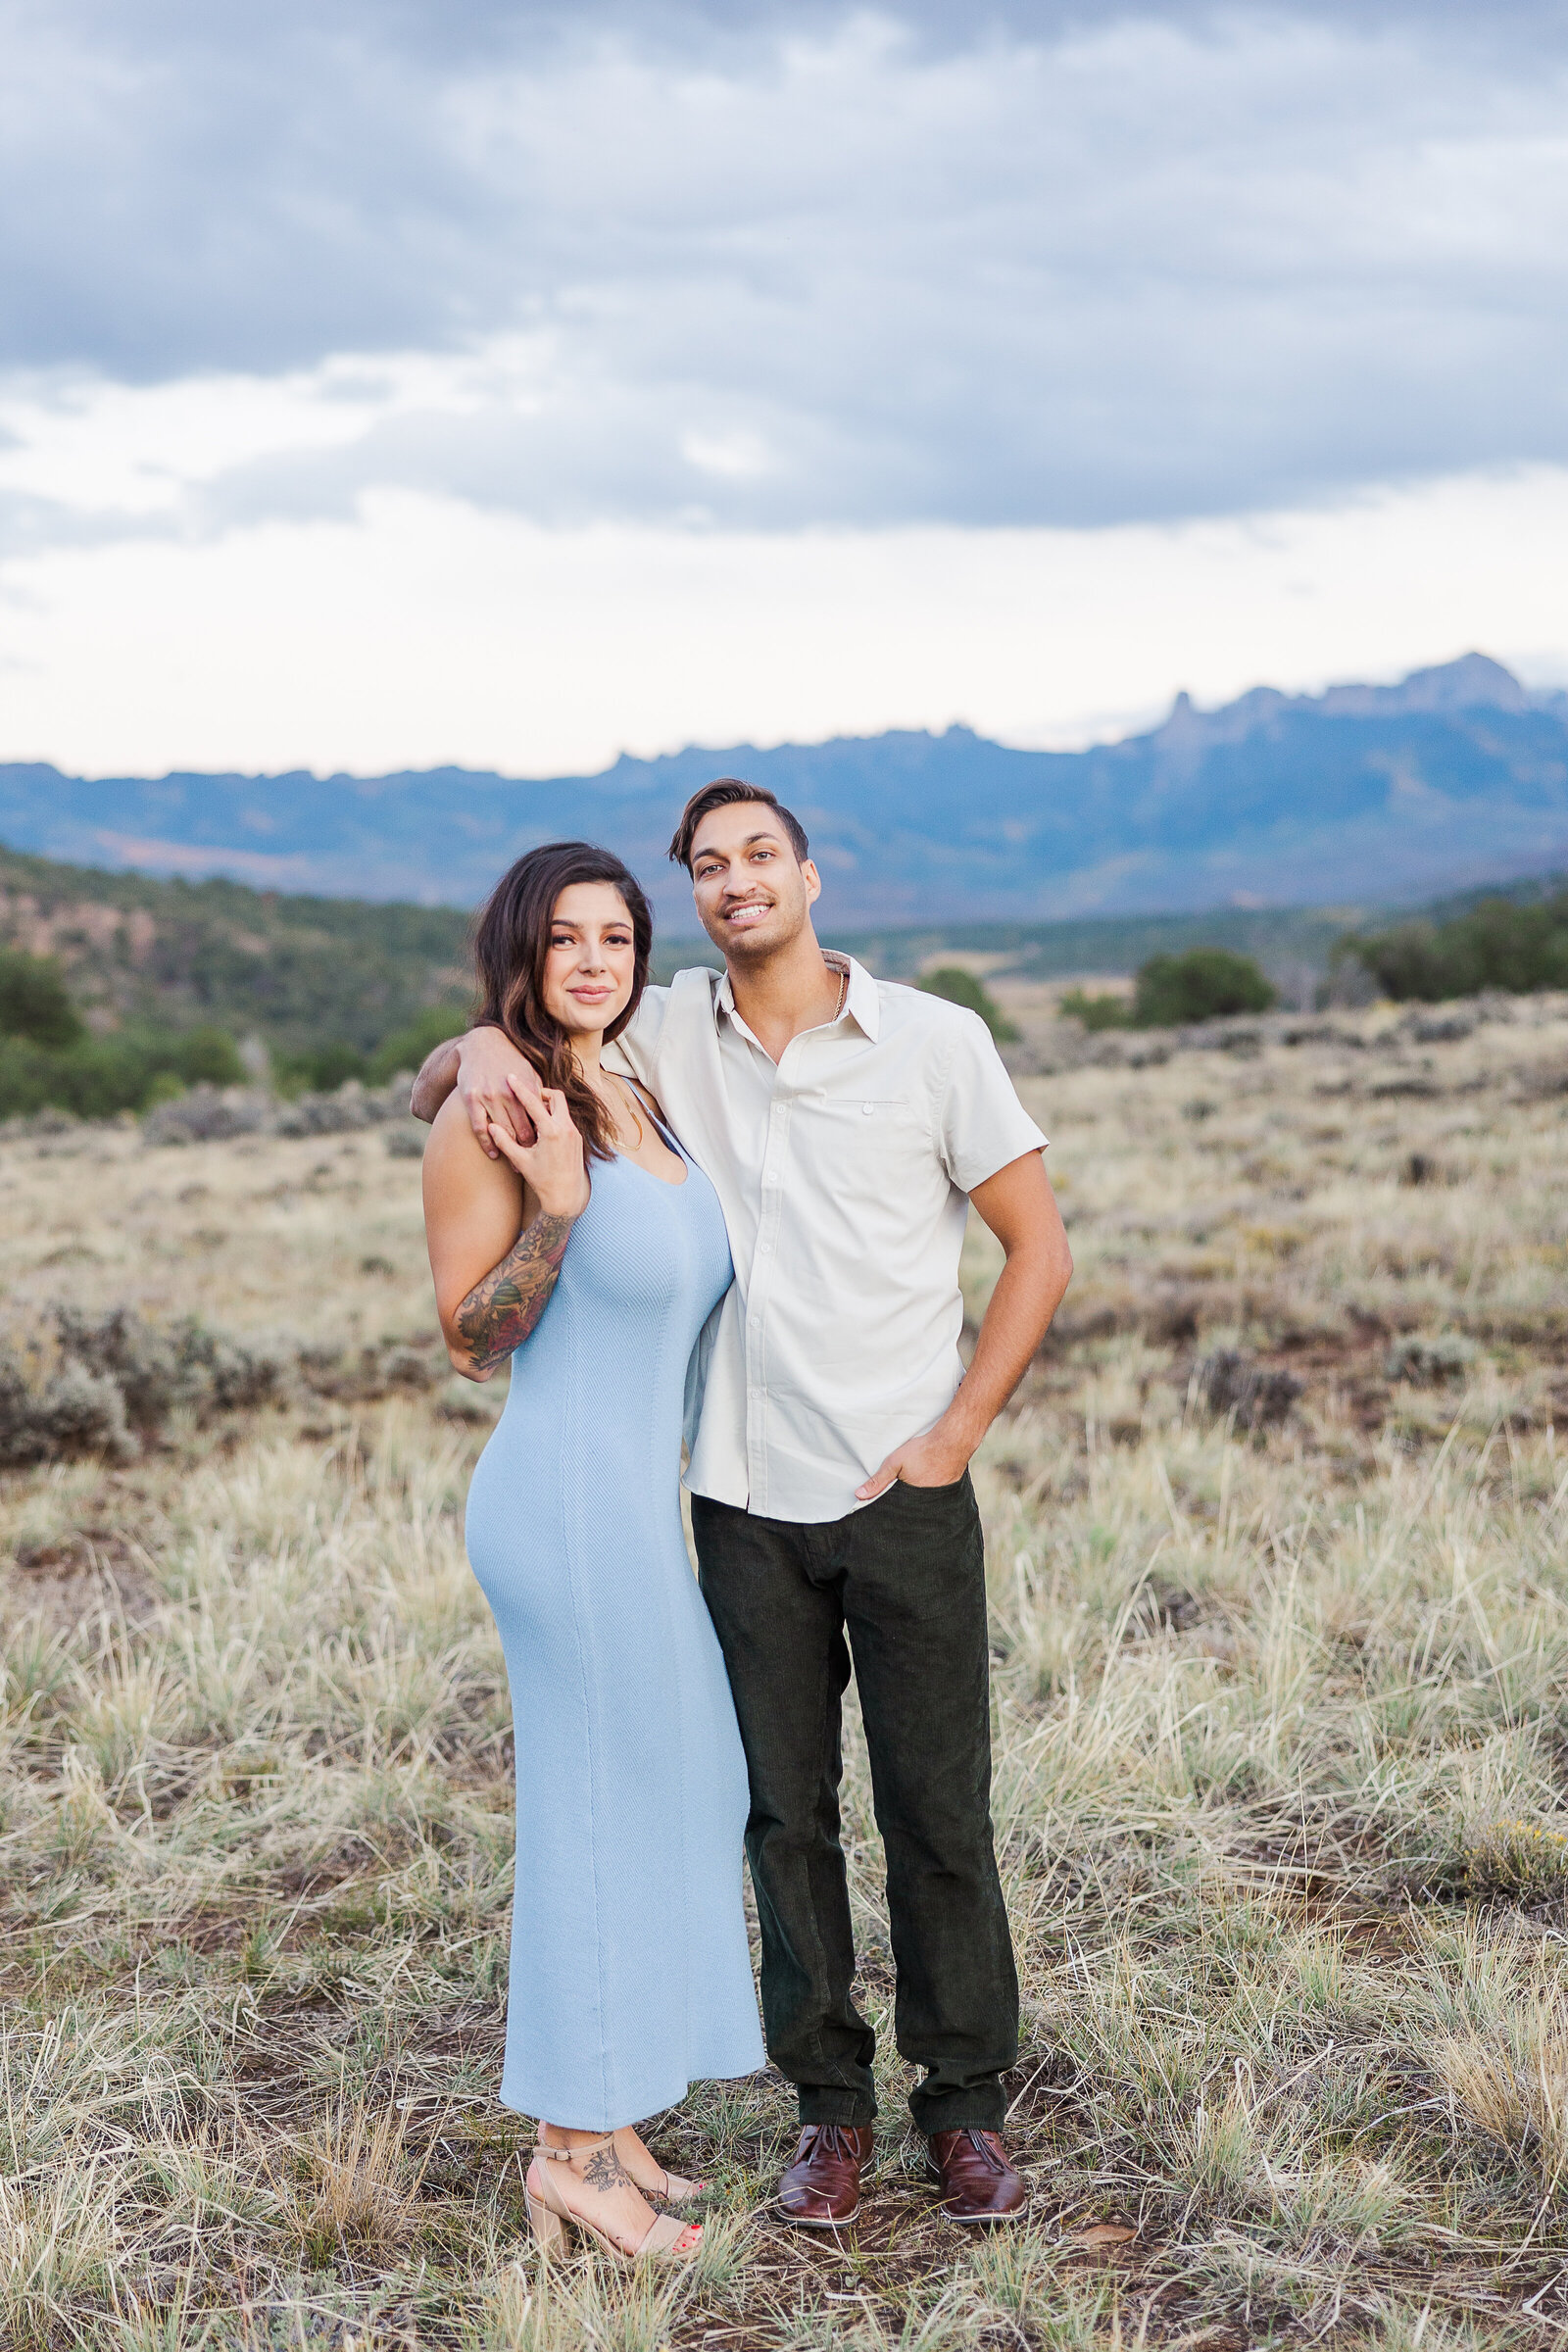 girl poses with boyfriend in field for ridgway state park photos